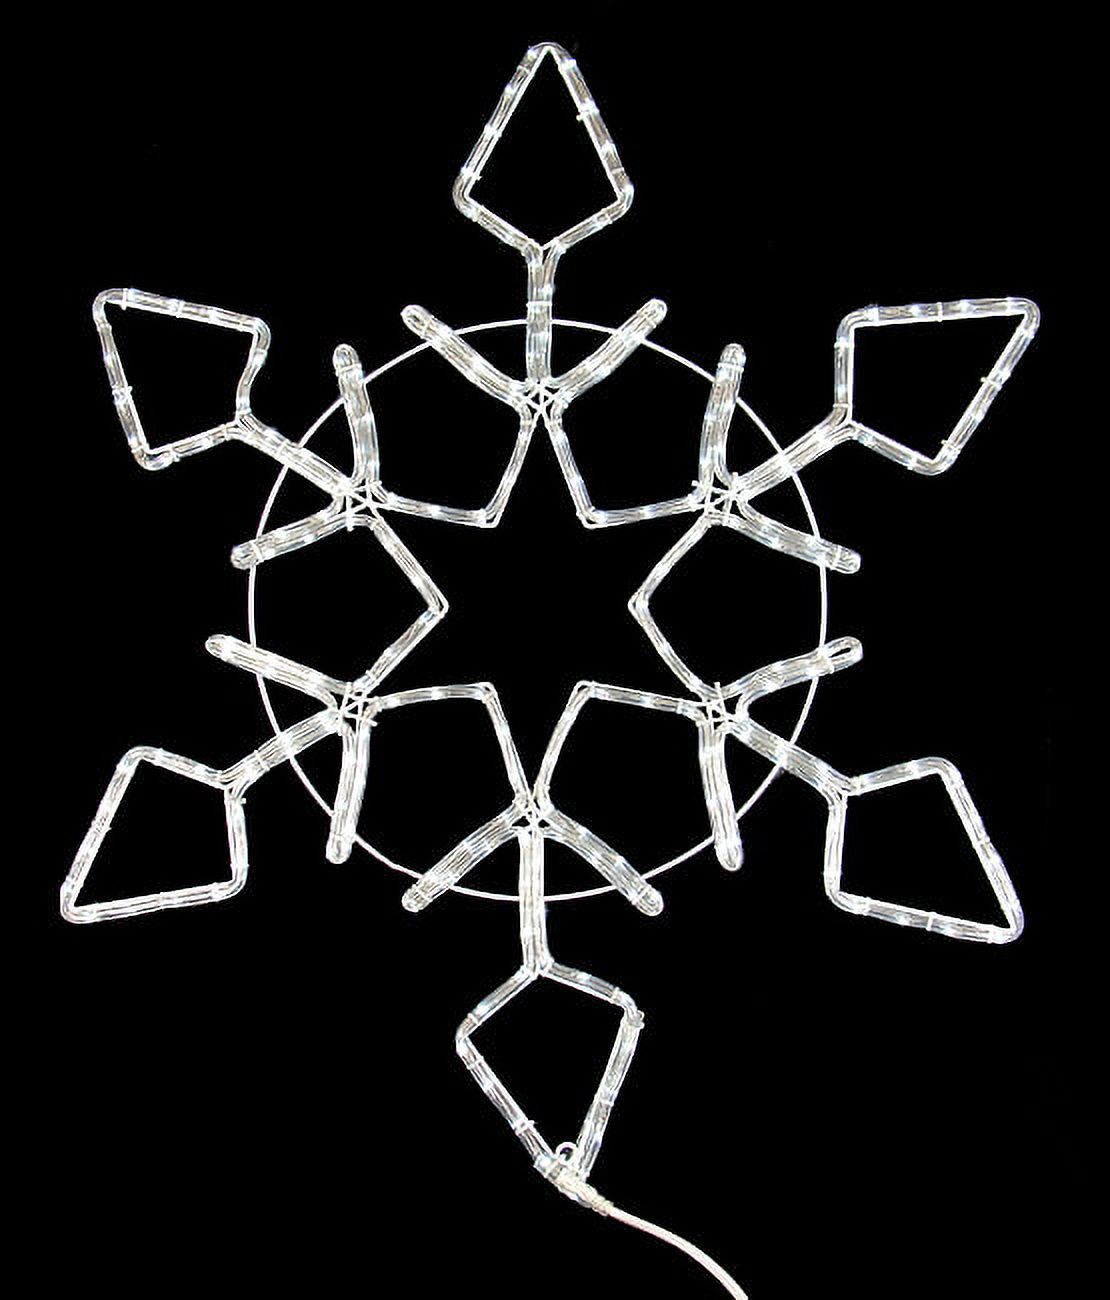 48" Pure White LED Lighted Rope Light Snowflake Commercial Christmas Decoration - image 1 of 2